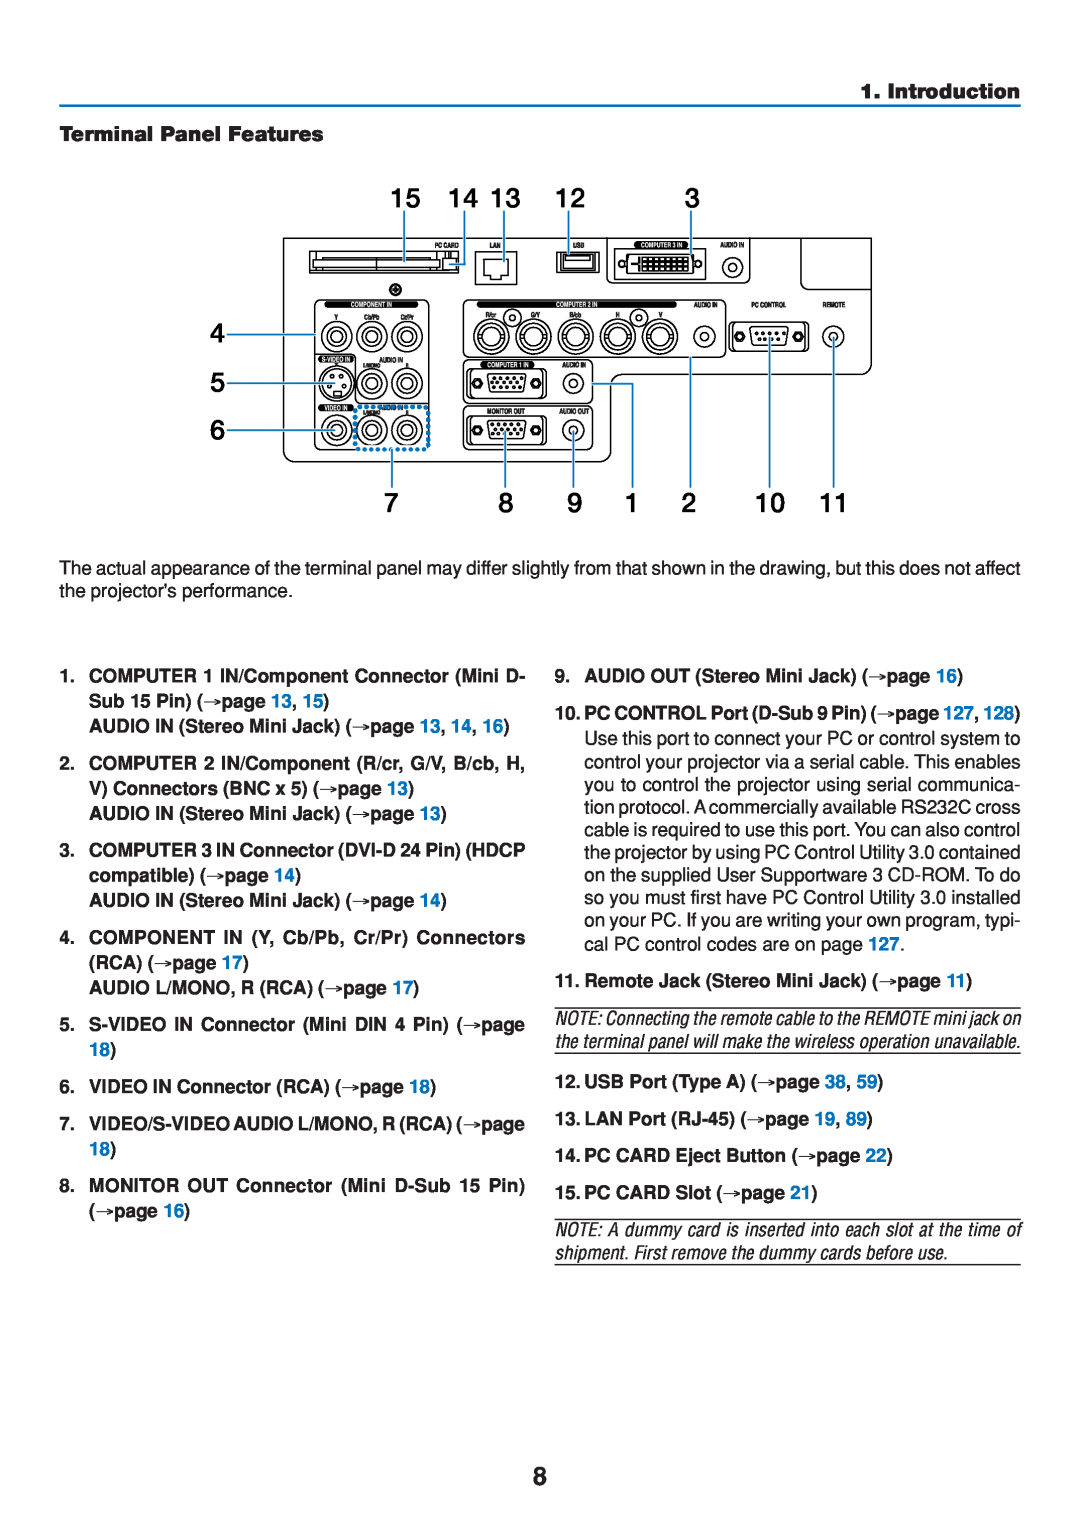 Dukane 8808 user manual Introduction Terminal Panel Features, 7 8 9 1 2 10, AUDIO IN Stereo Mini Jack →page 13, 14 